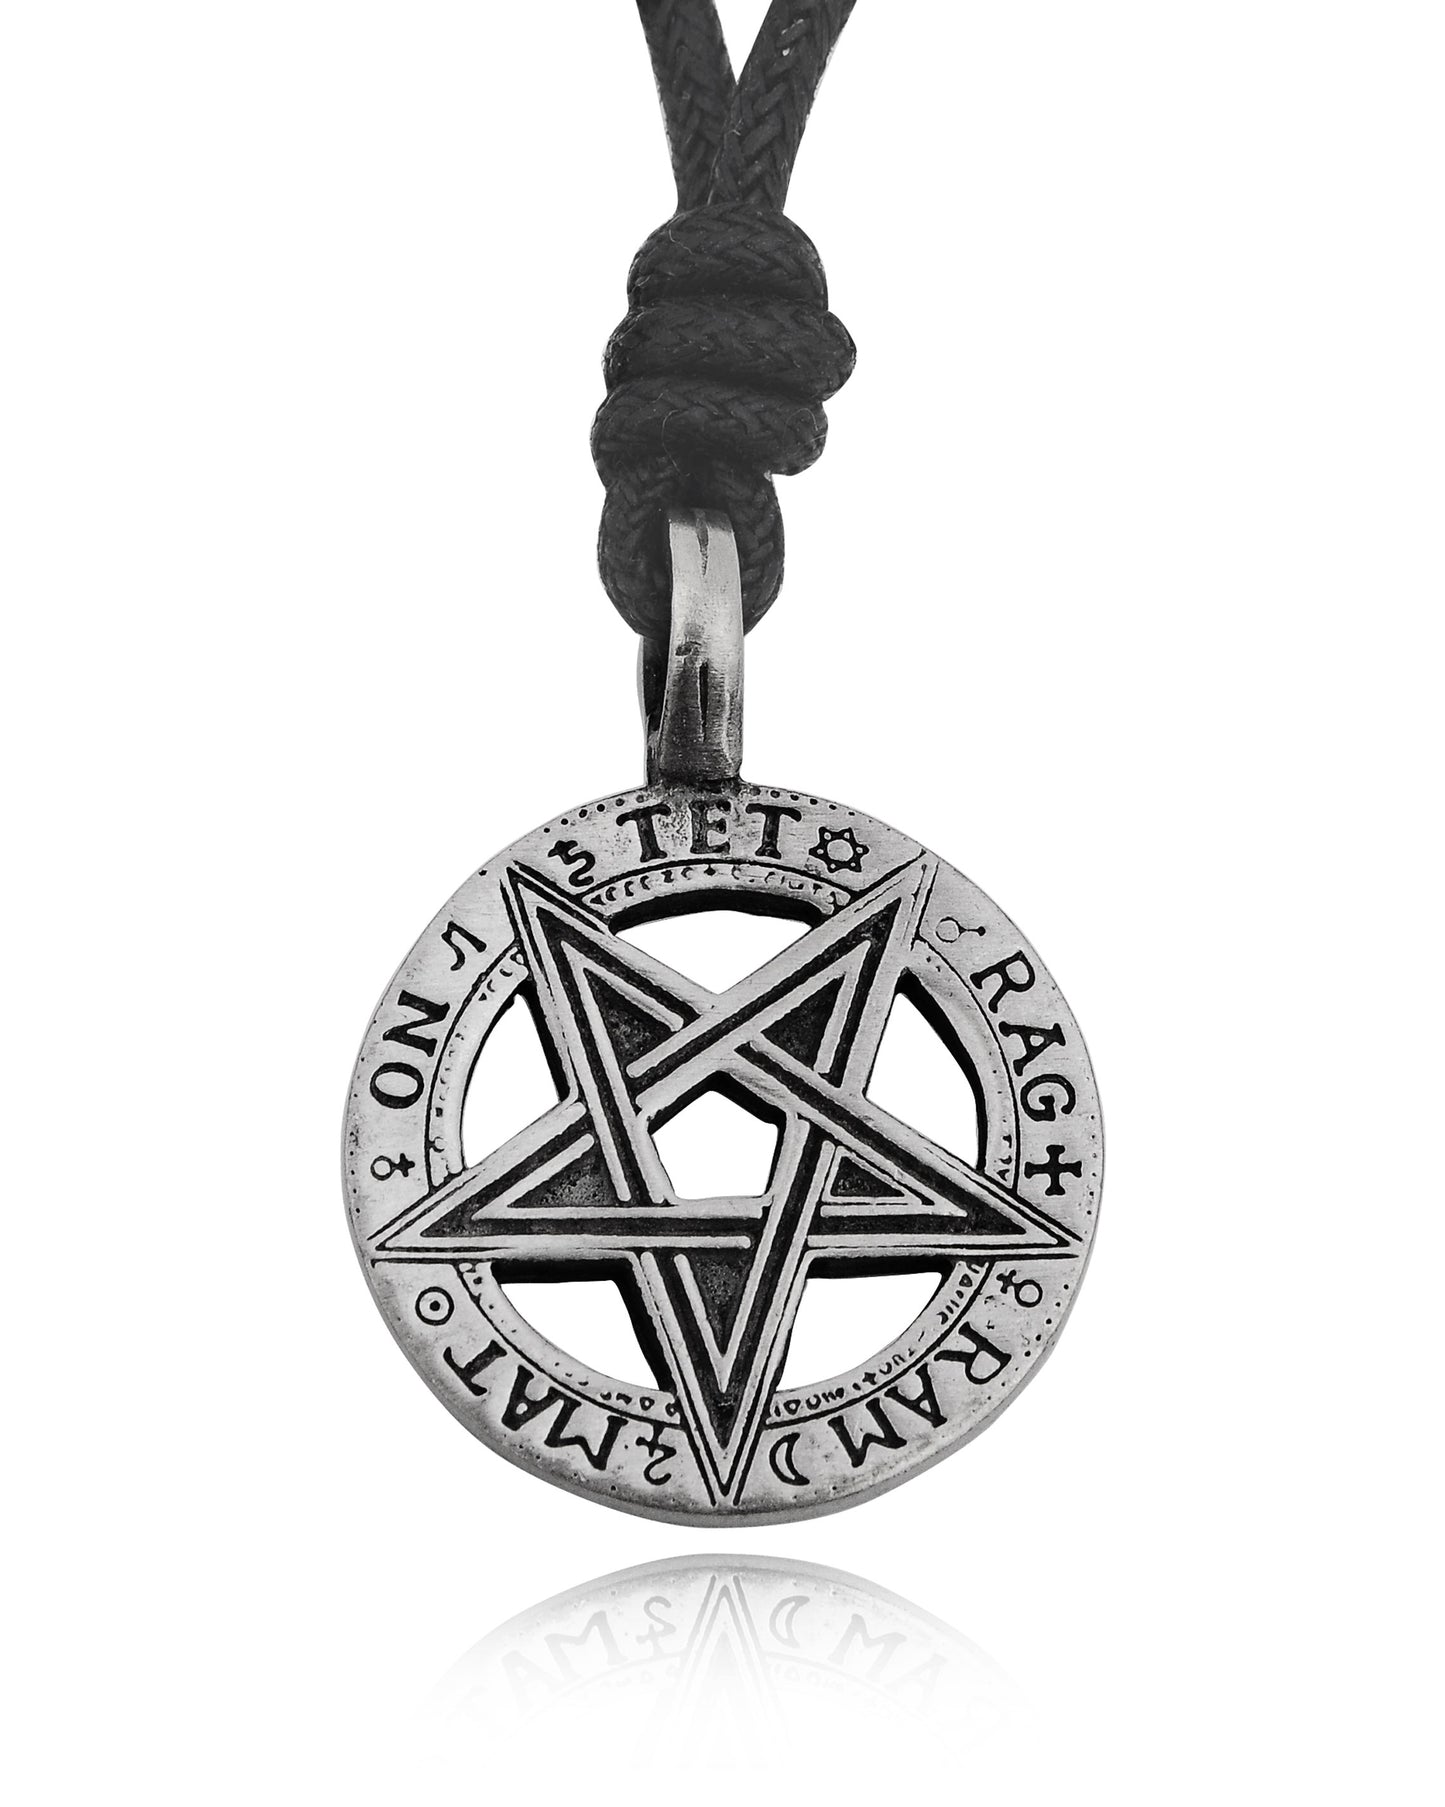 Lovely Pentagram 5 Pointed Star Silver Pewter Charm Necklace Pendant Jewelry